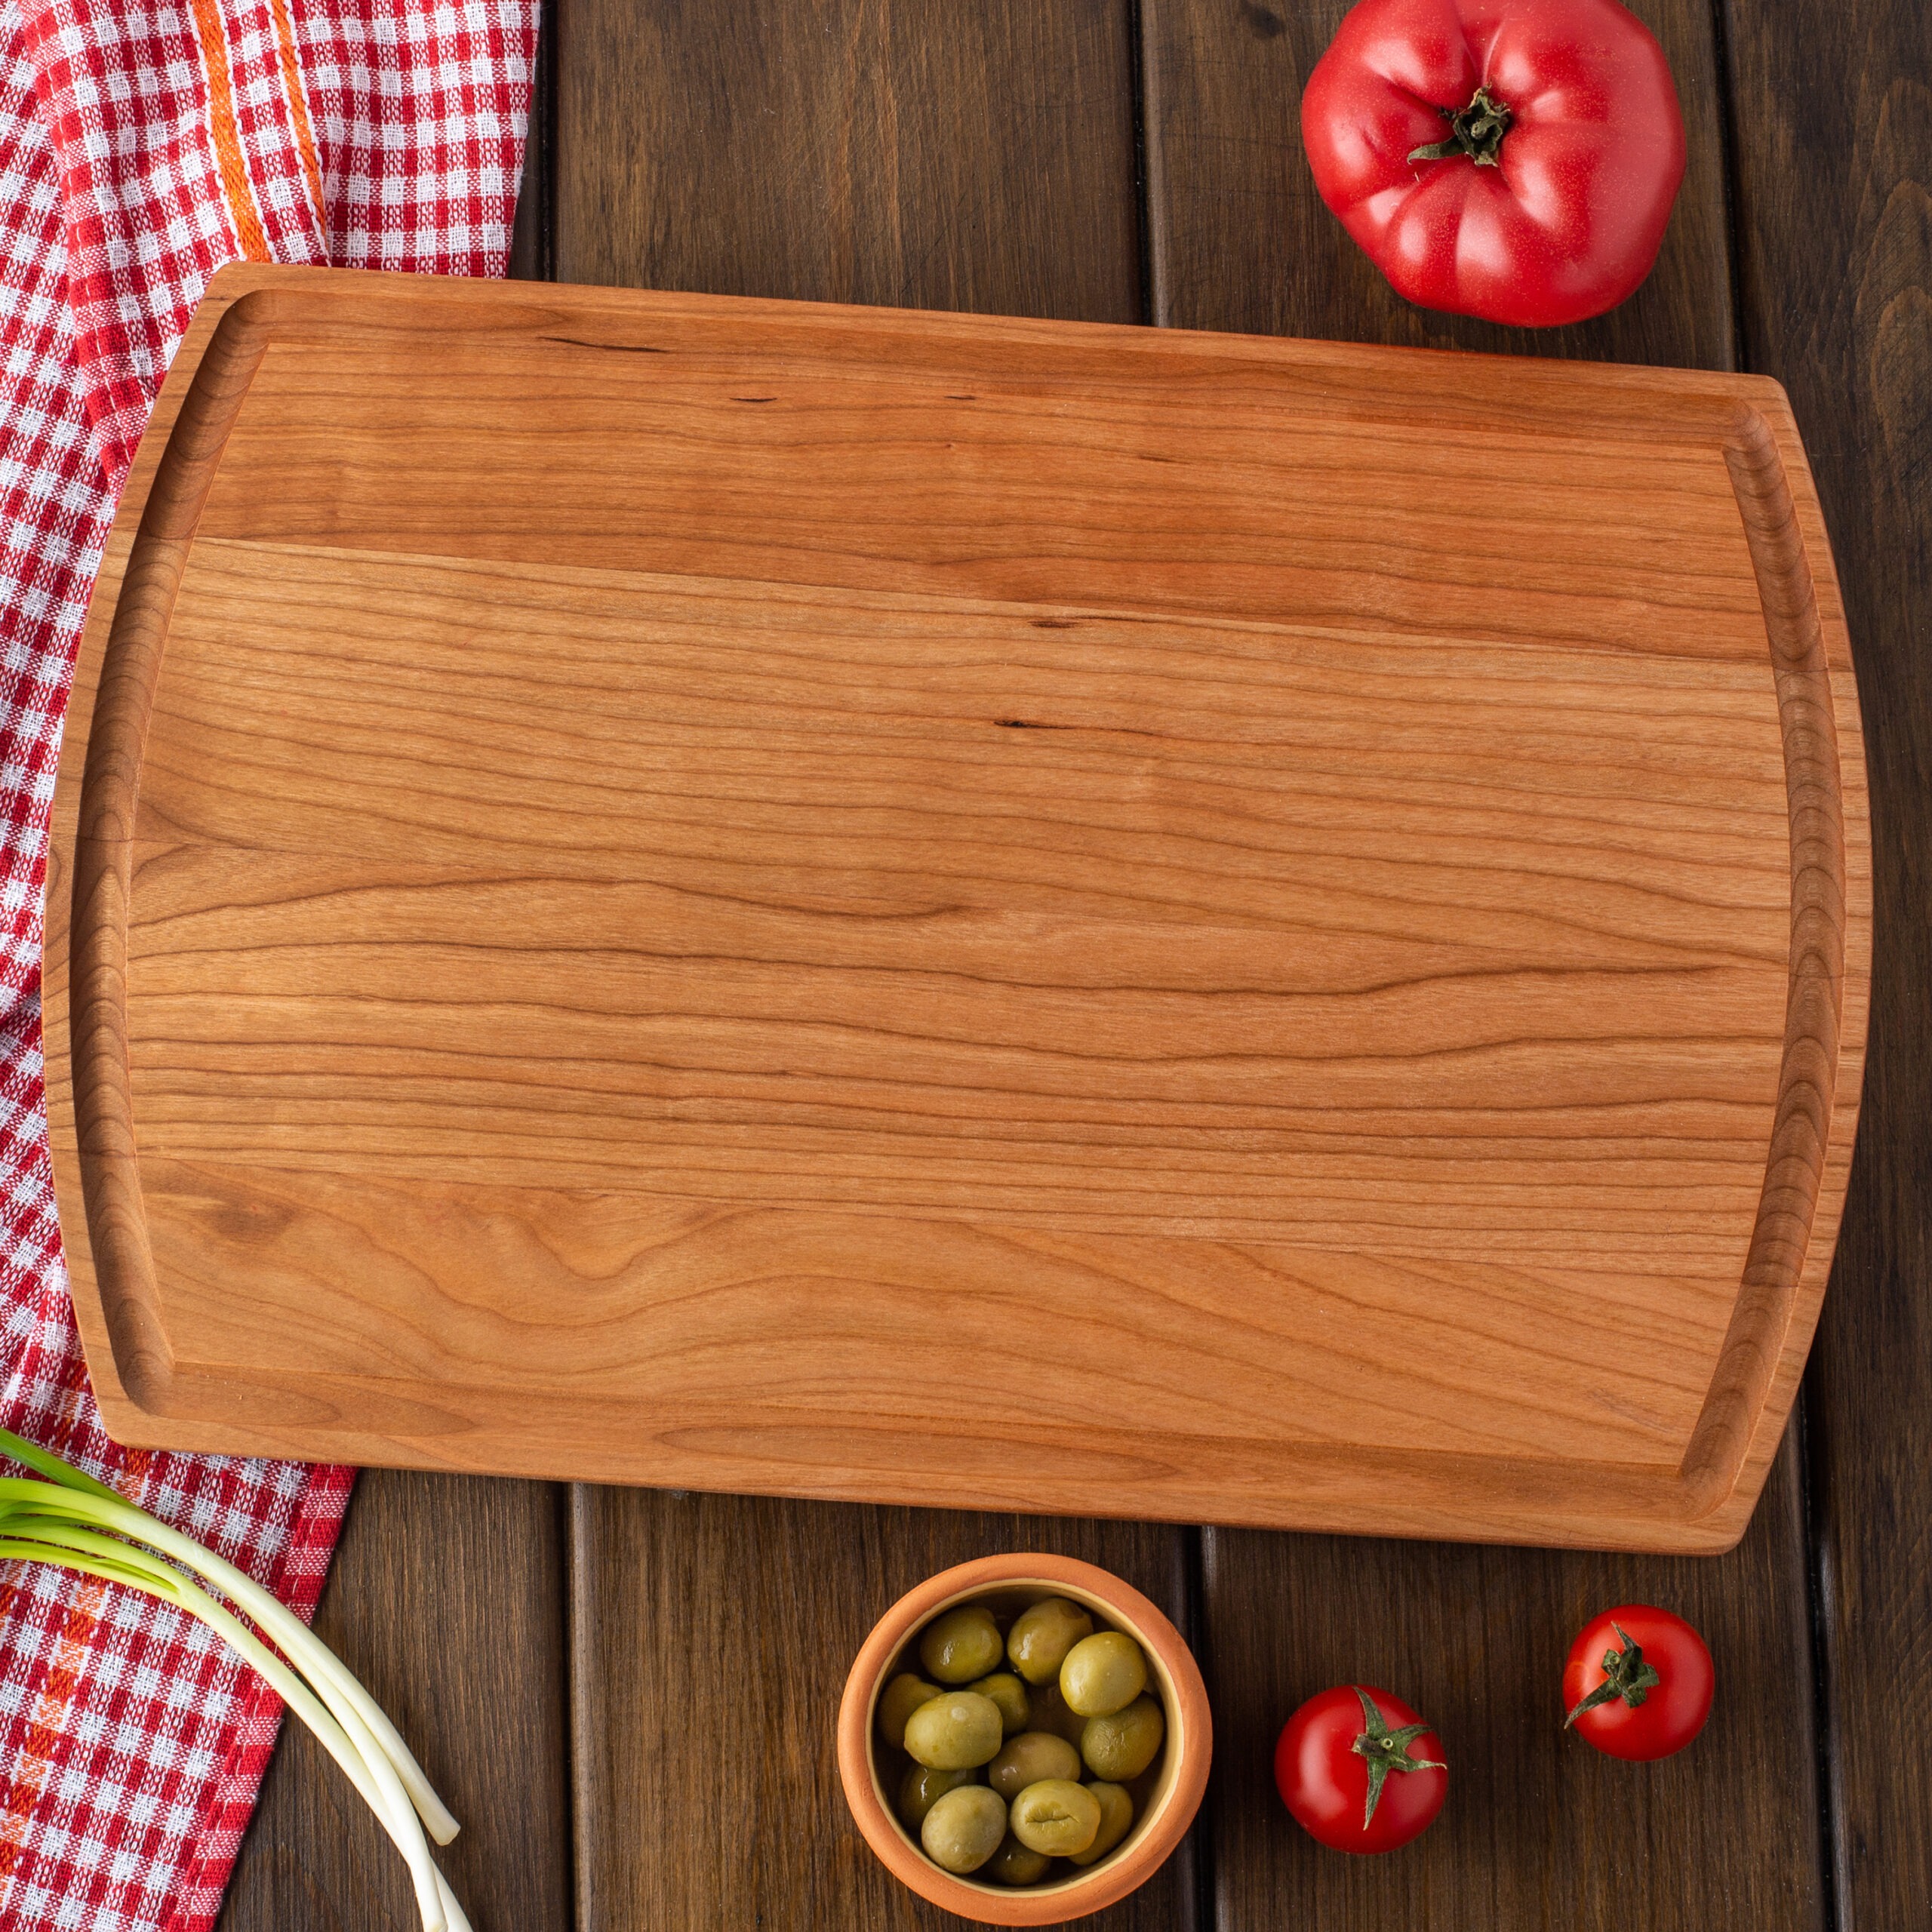 https://forest-decor.com/wp-content/uploads/large-wood-cutting-board-with-juice-groove-arched-cherry-16x10-4-scaled.jpg